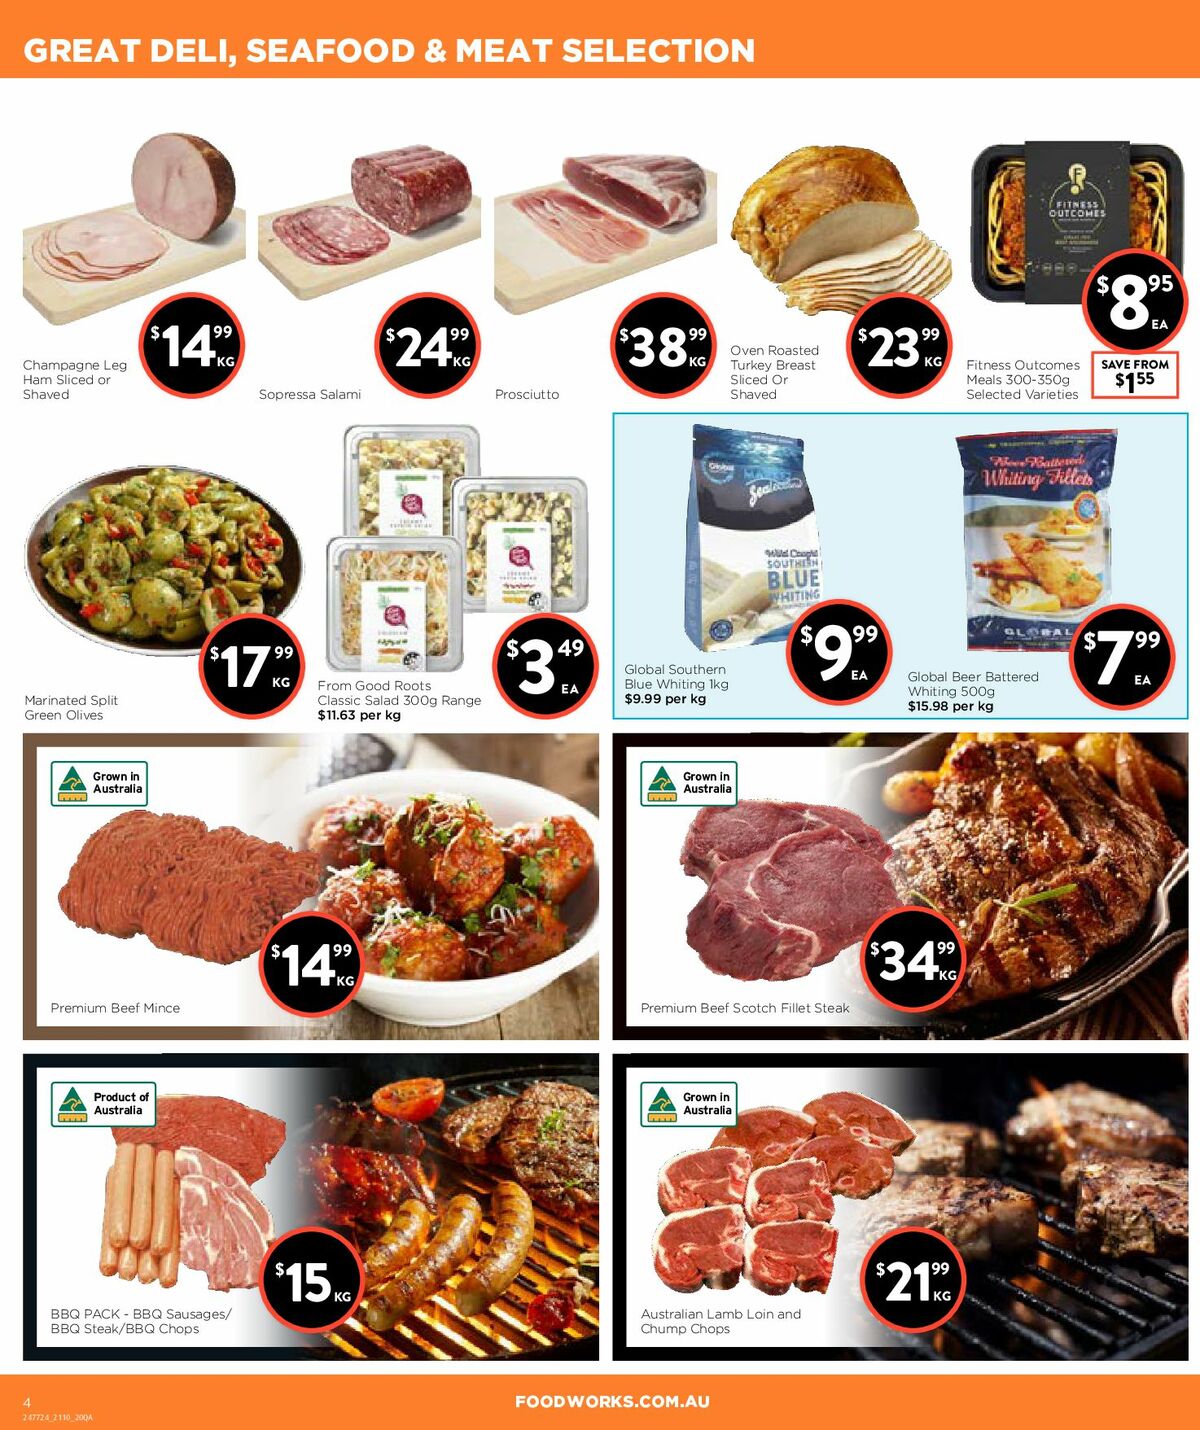 FoodWorks Supermarket Catalogues from 21 October